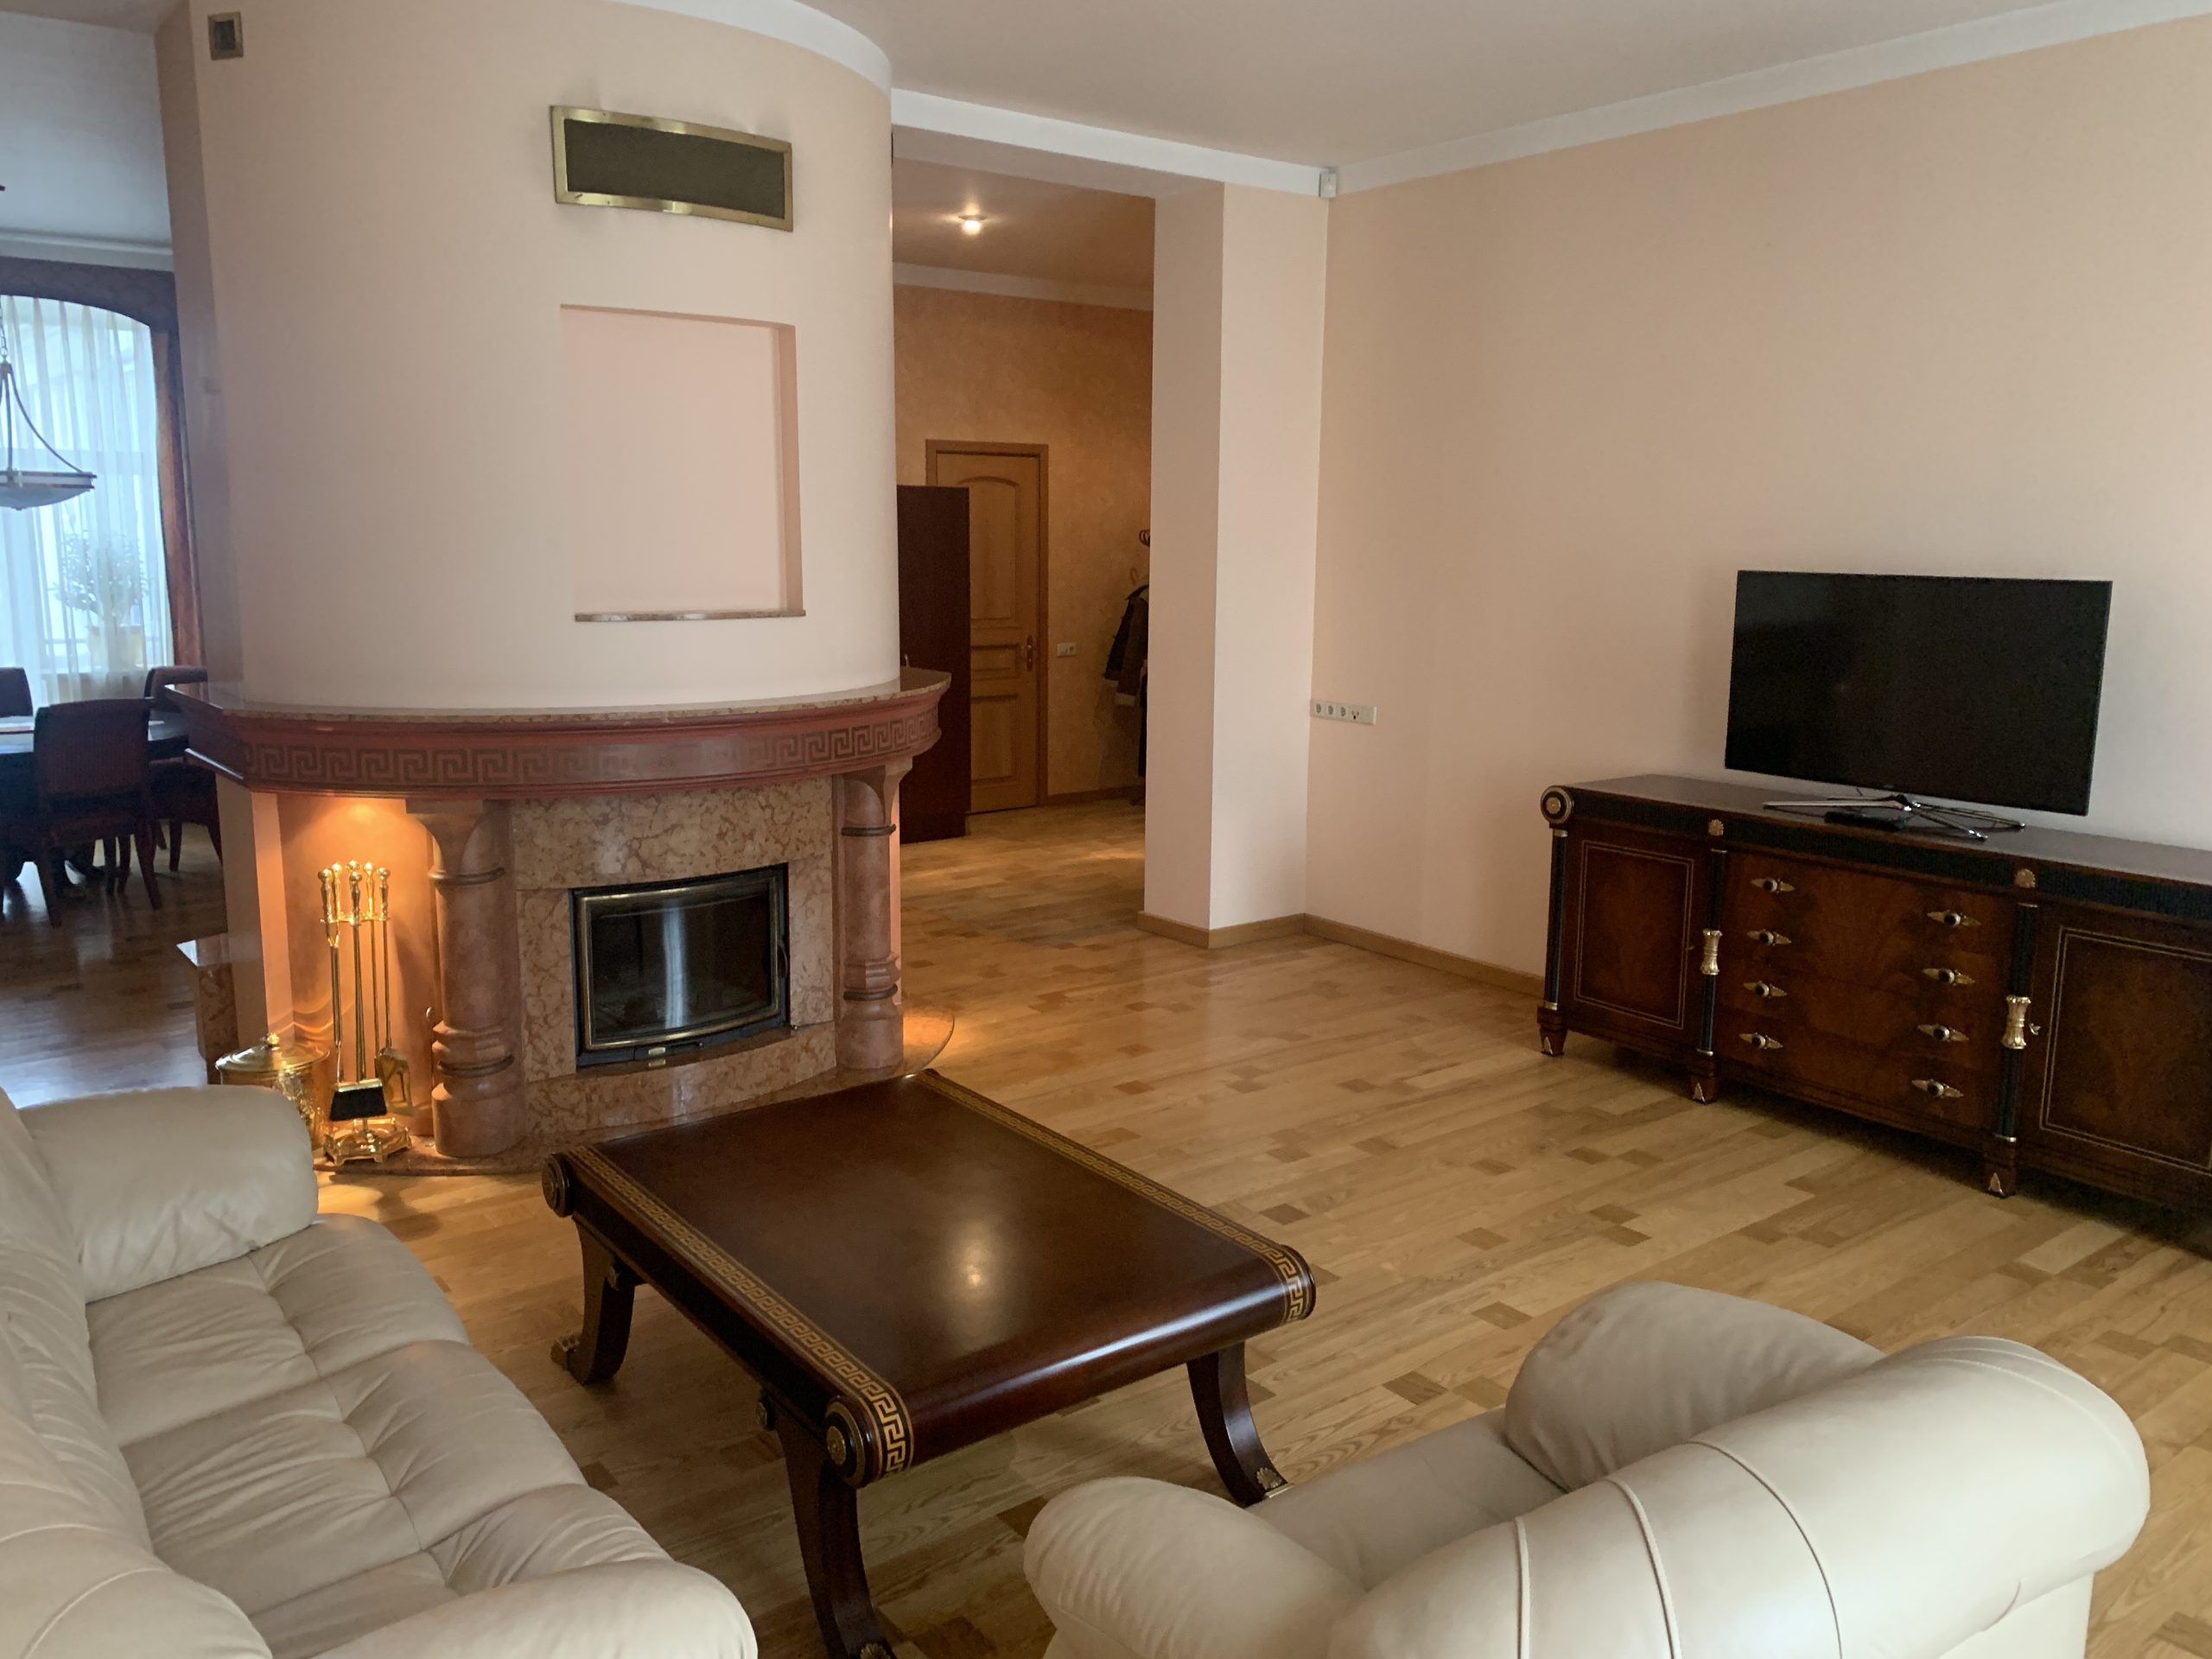 A spacious apartment to rent in a quiet city centre